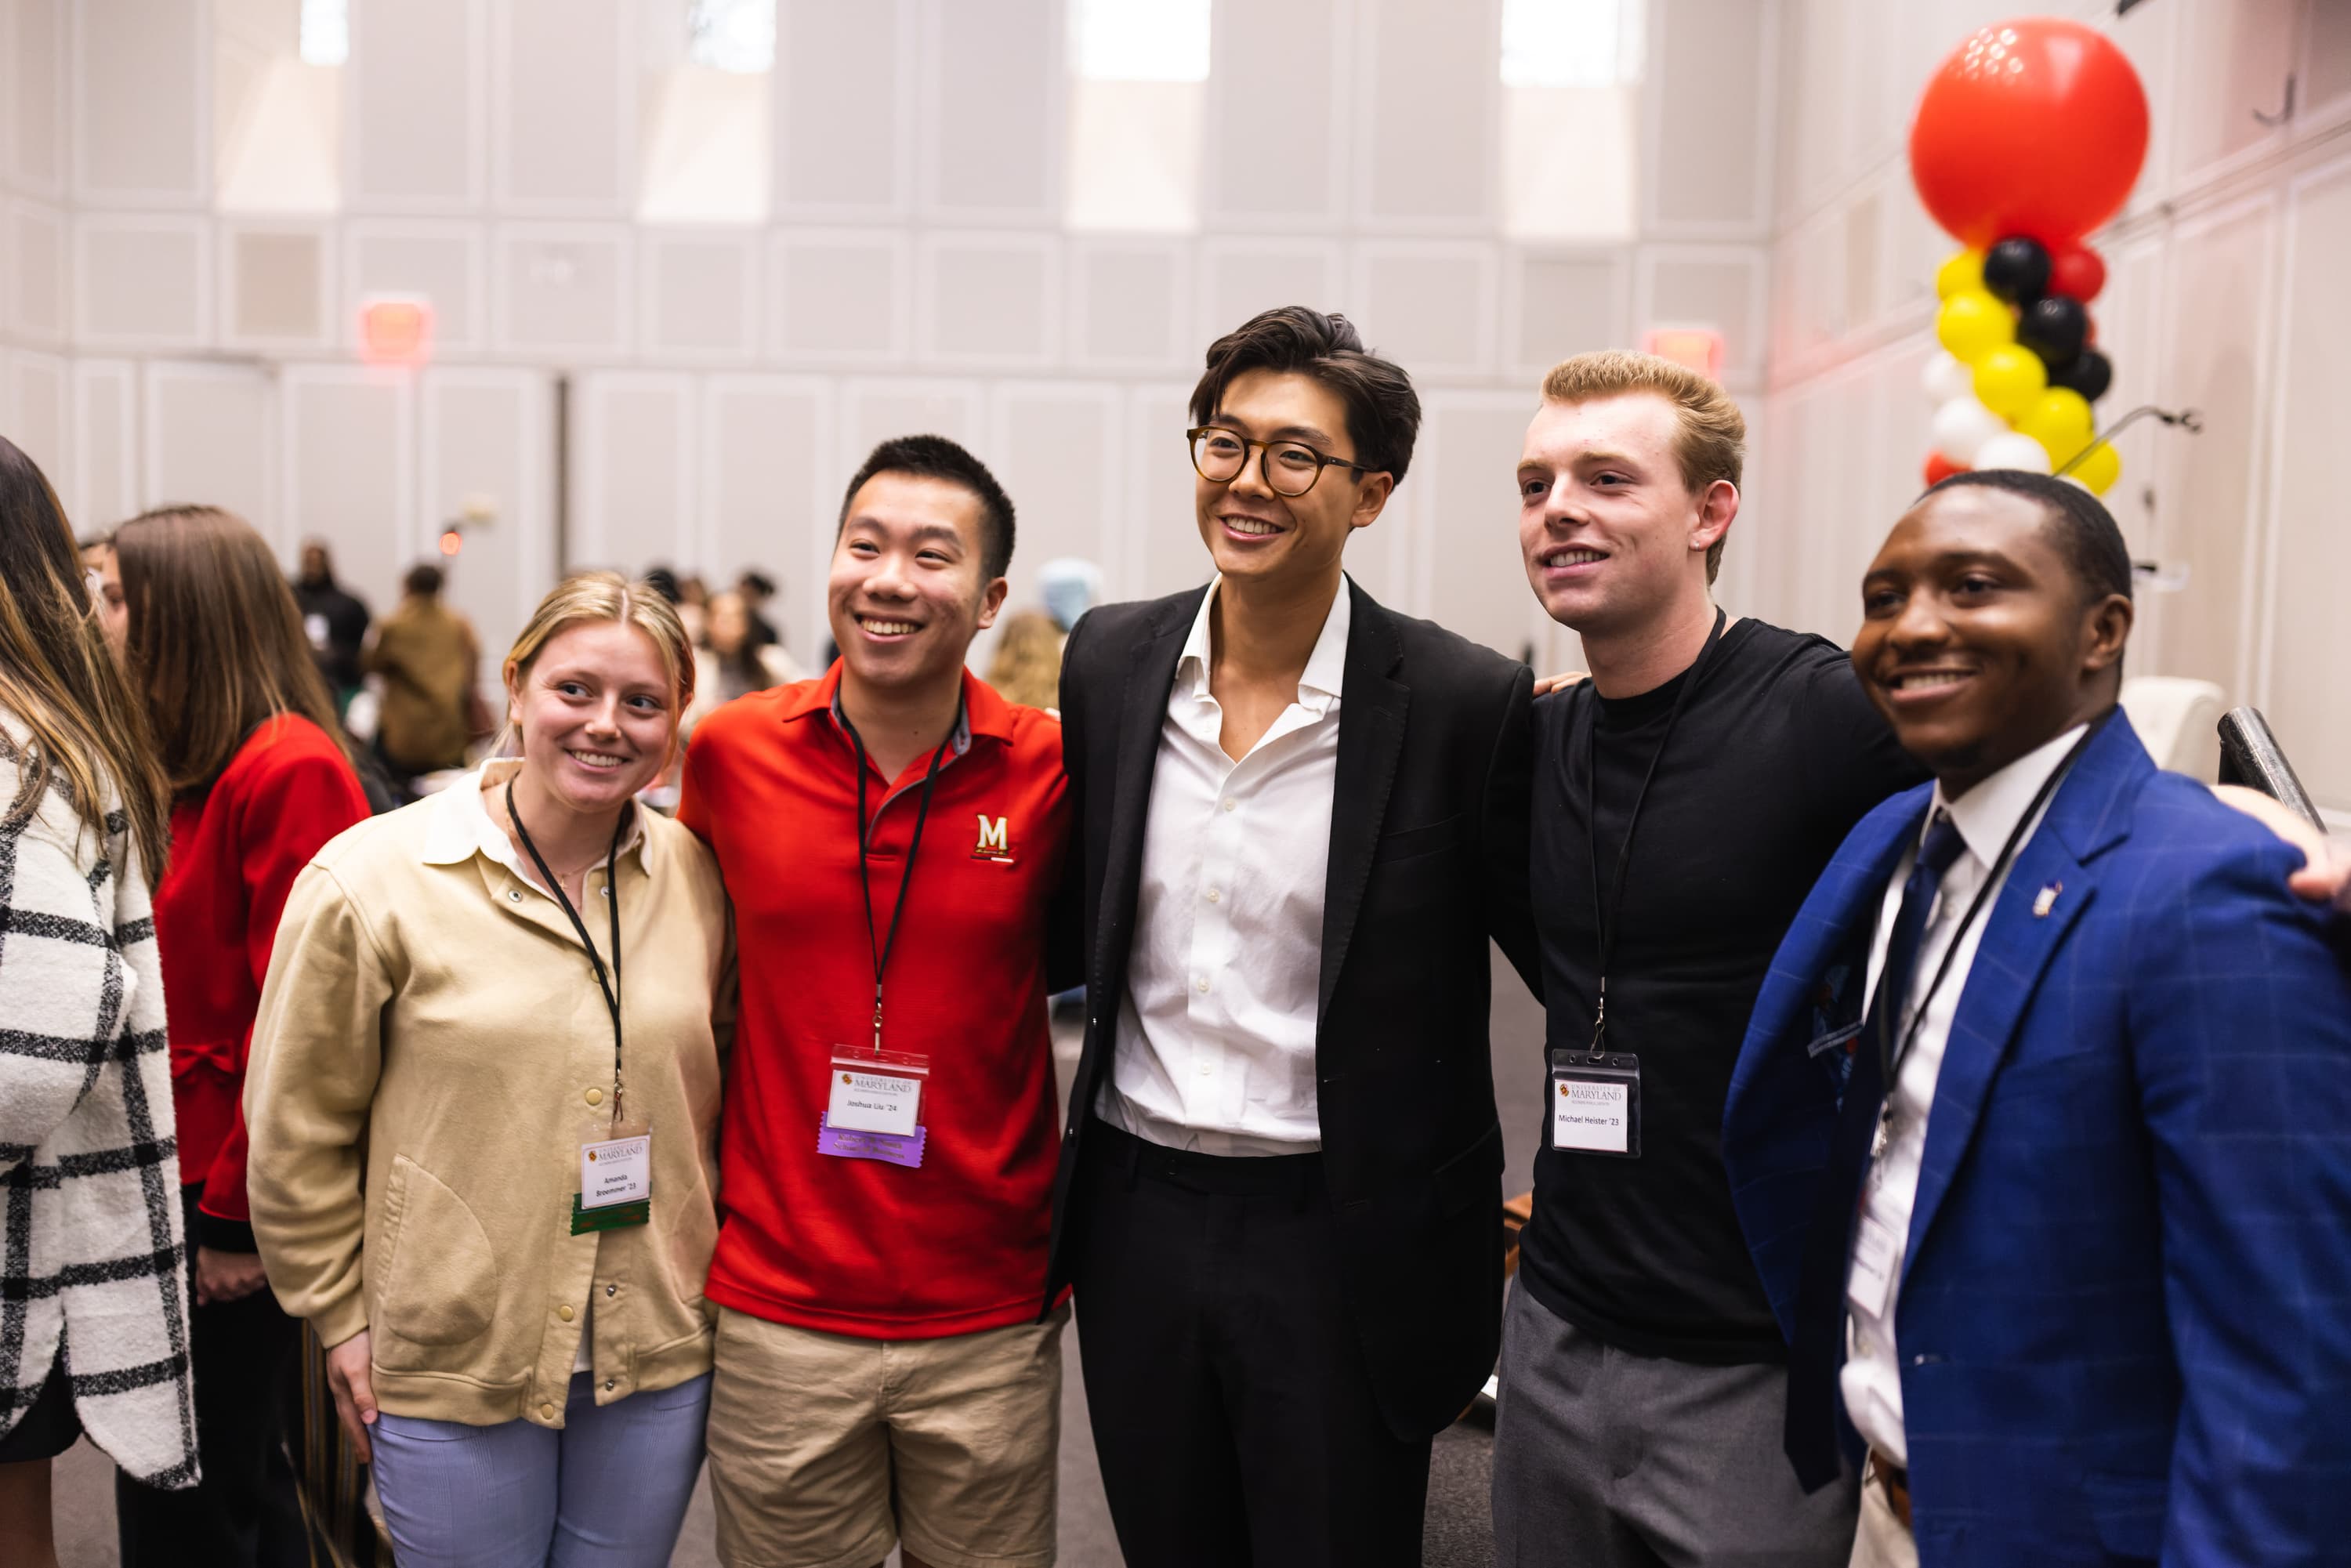 Derek Xiao '19 poses with a group of Terps Under 30 participants for a group photo